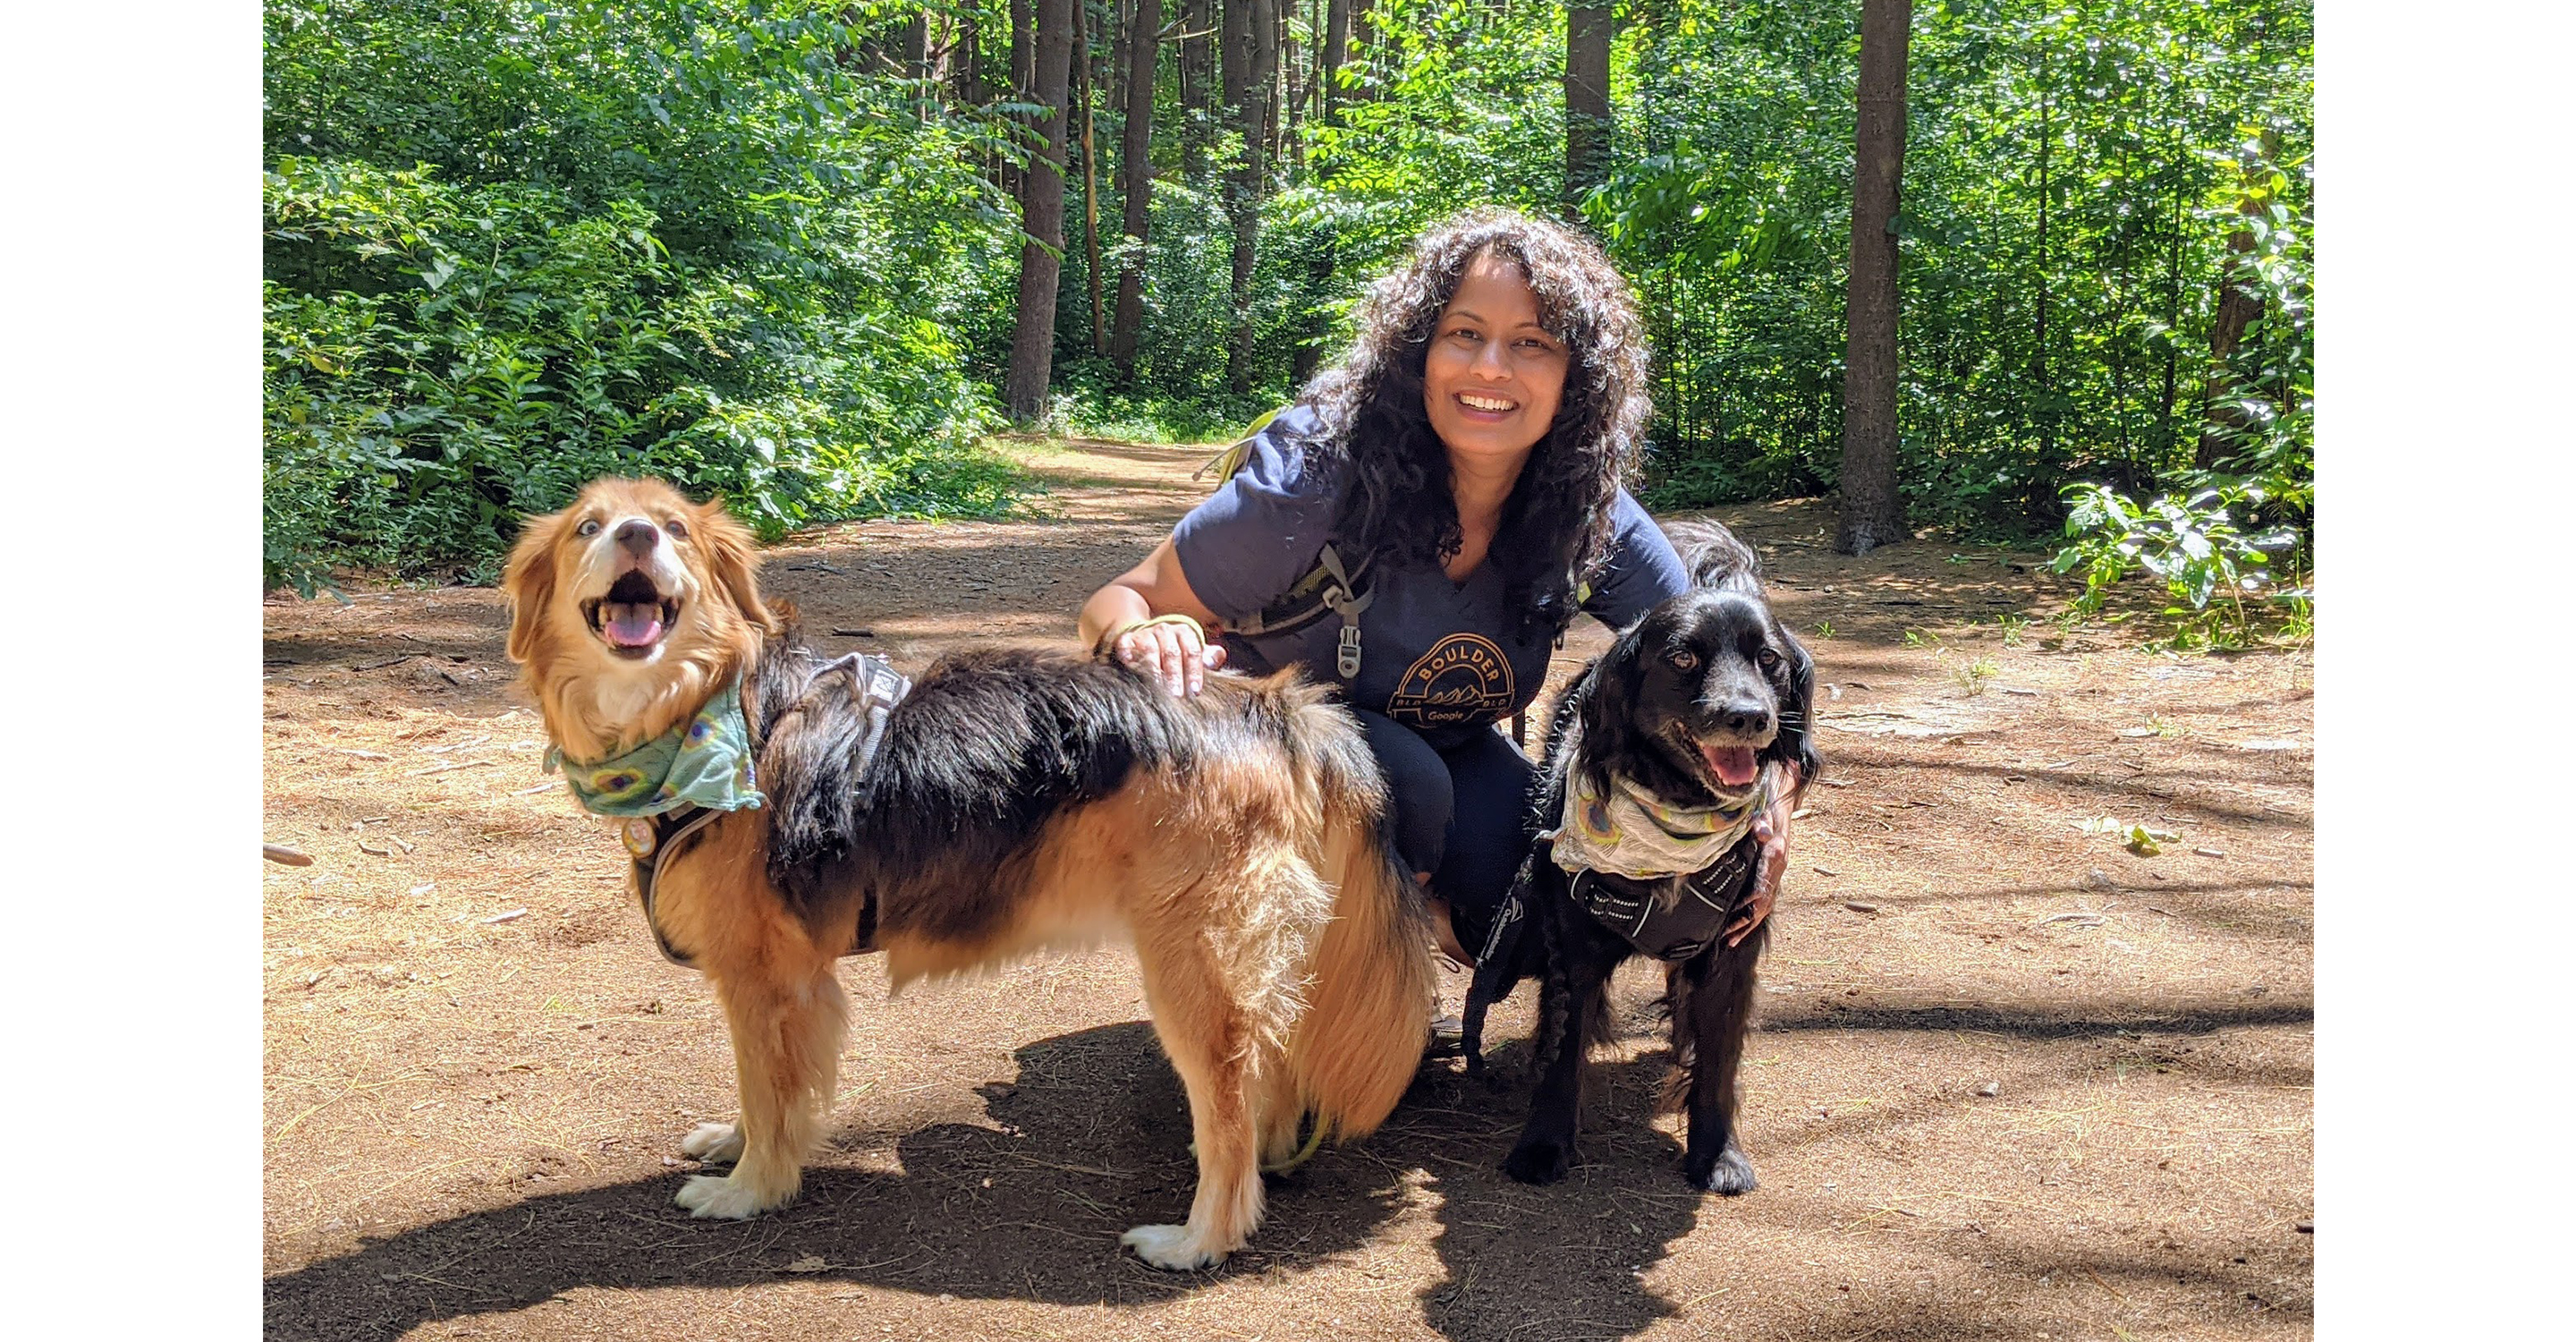 Hiking with my dogs, Indu and Andy, on Long Island, NY, 2020.